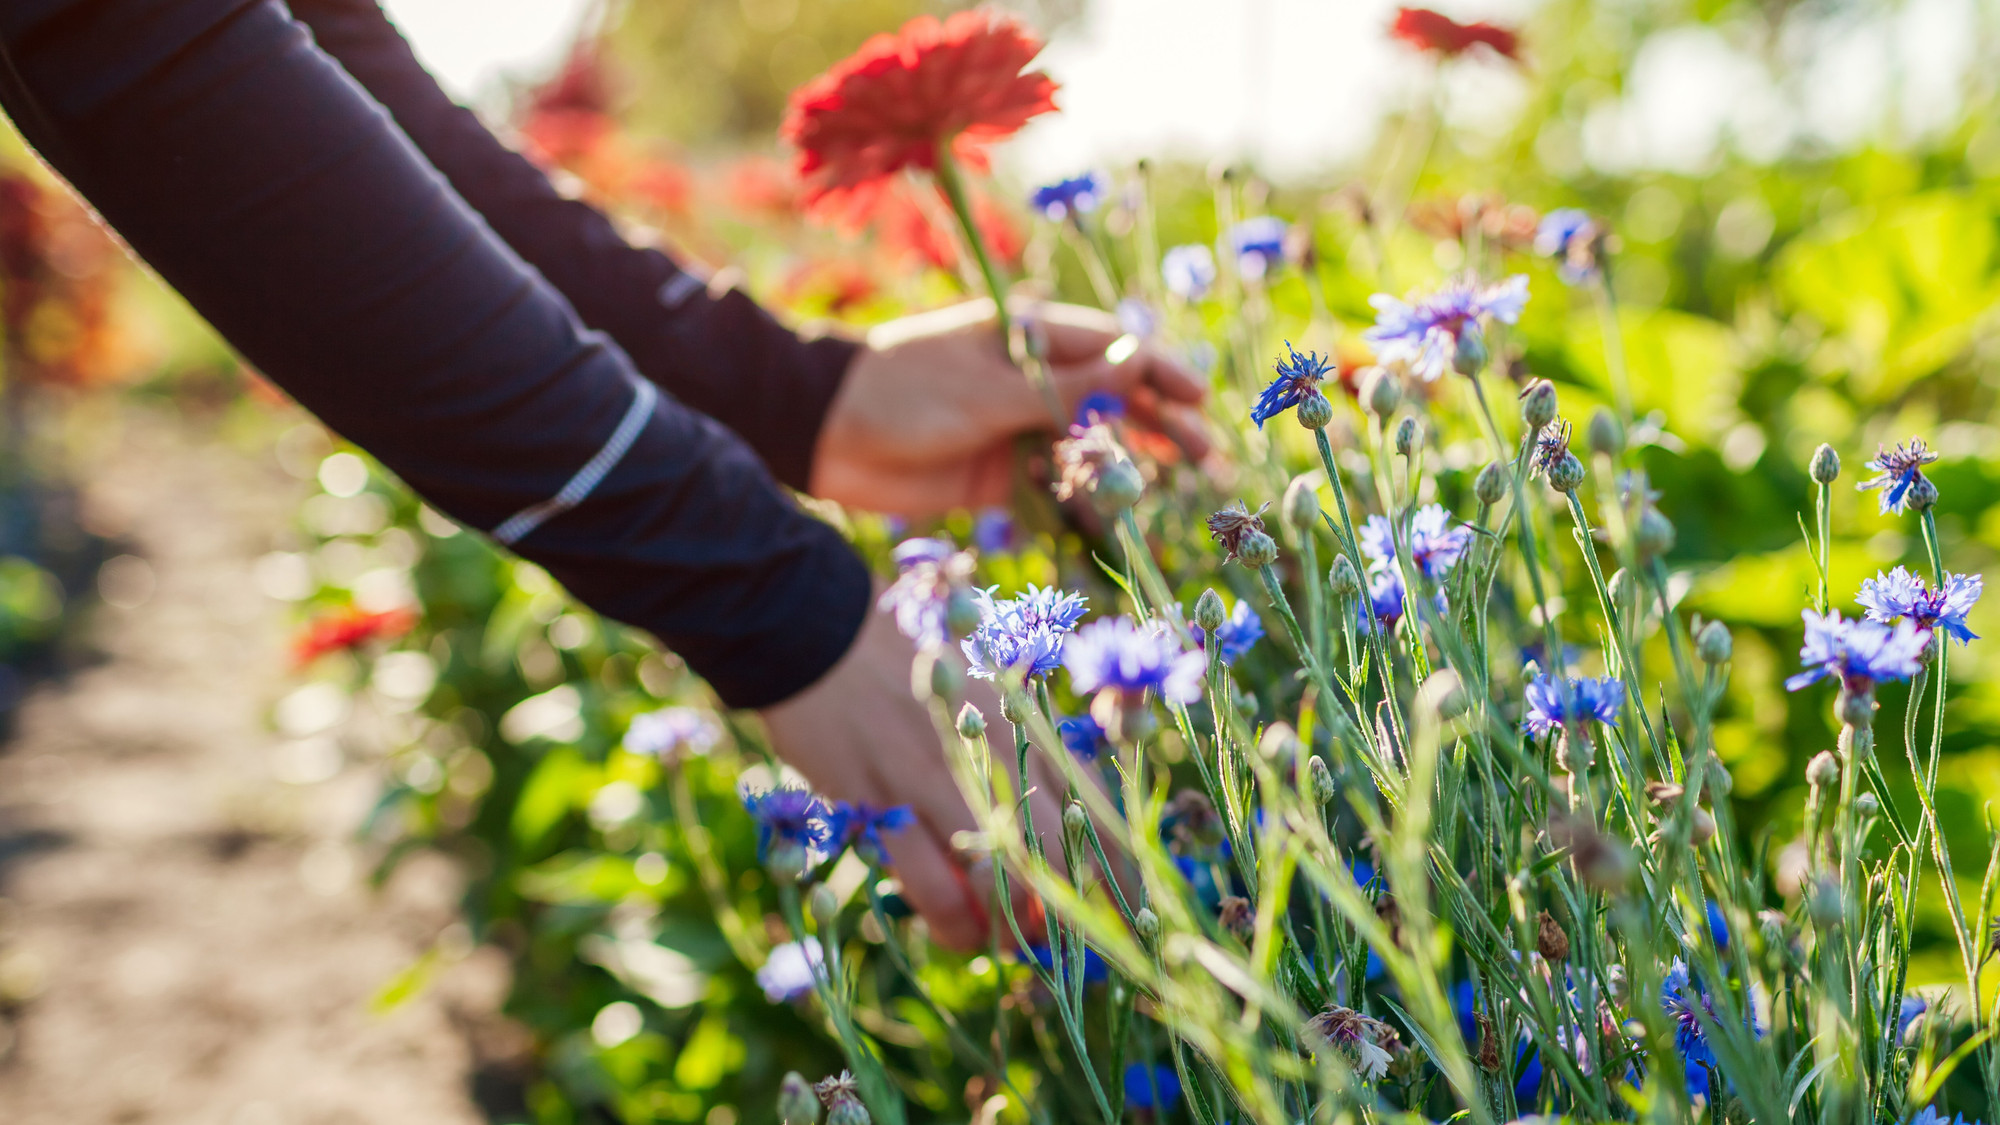 You can pick your own flower bouquets at this festival near Montreal in July!